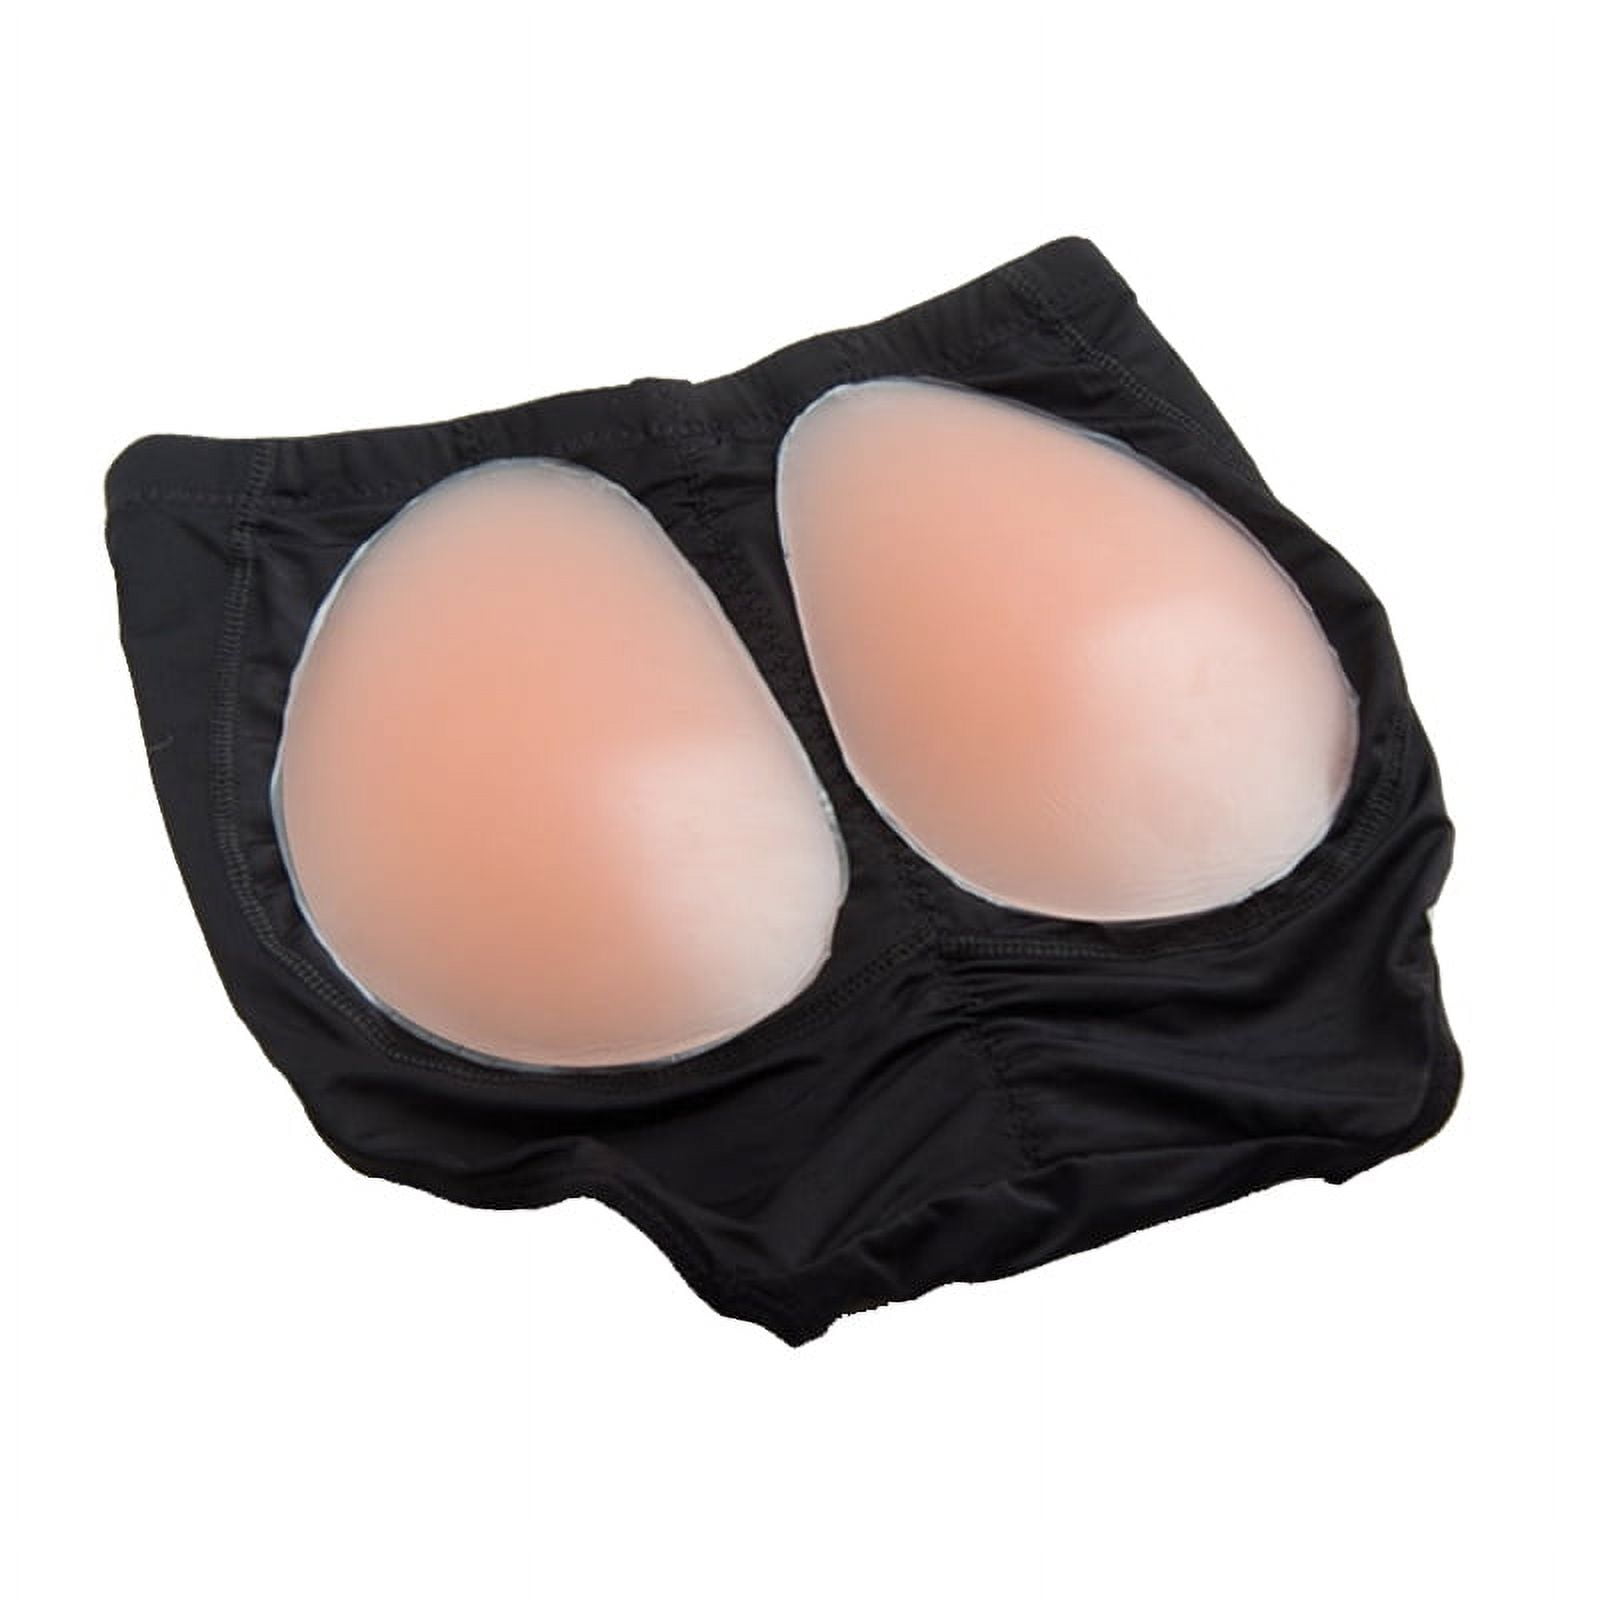 SILICONE BUTTOCKS SILICON PADDED PANTIES BUM BUTT LIFT PAD BRIEF POWER  SHAPEWEAR 